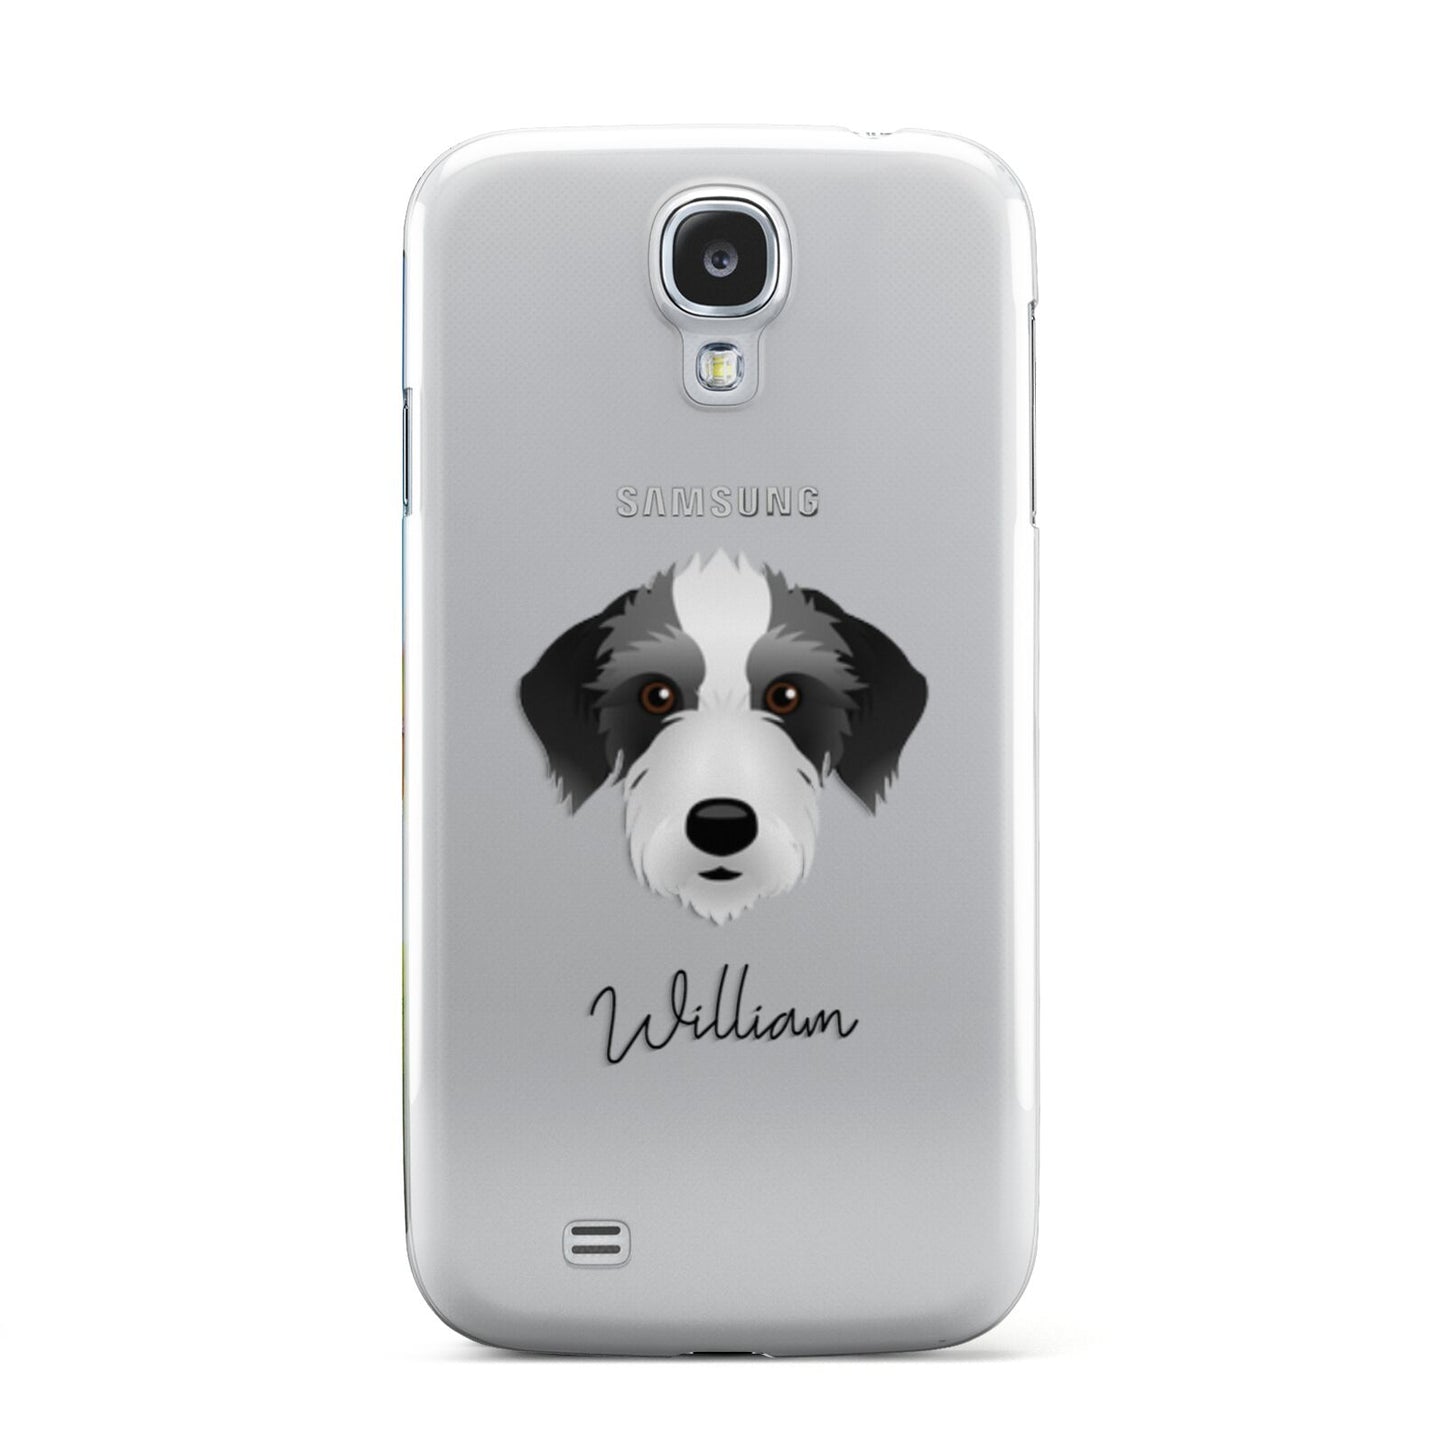 Bedlington Whippet Personalised Samsung Galaxy S4 Case